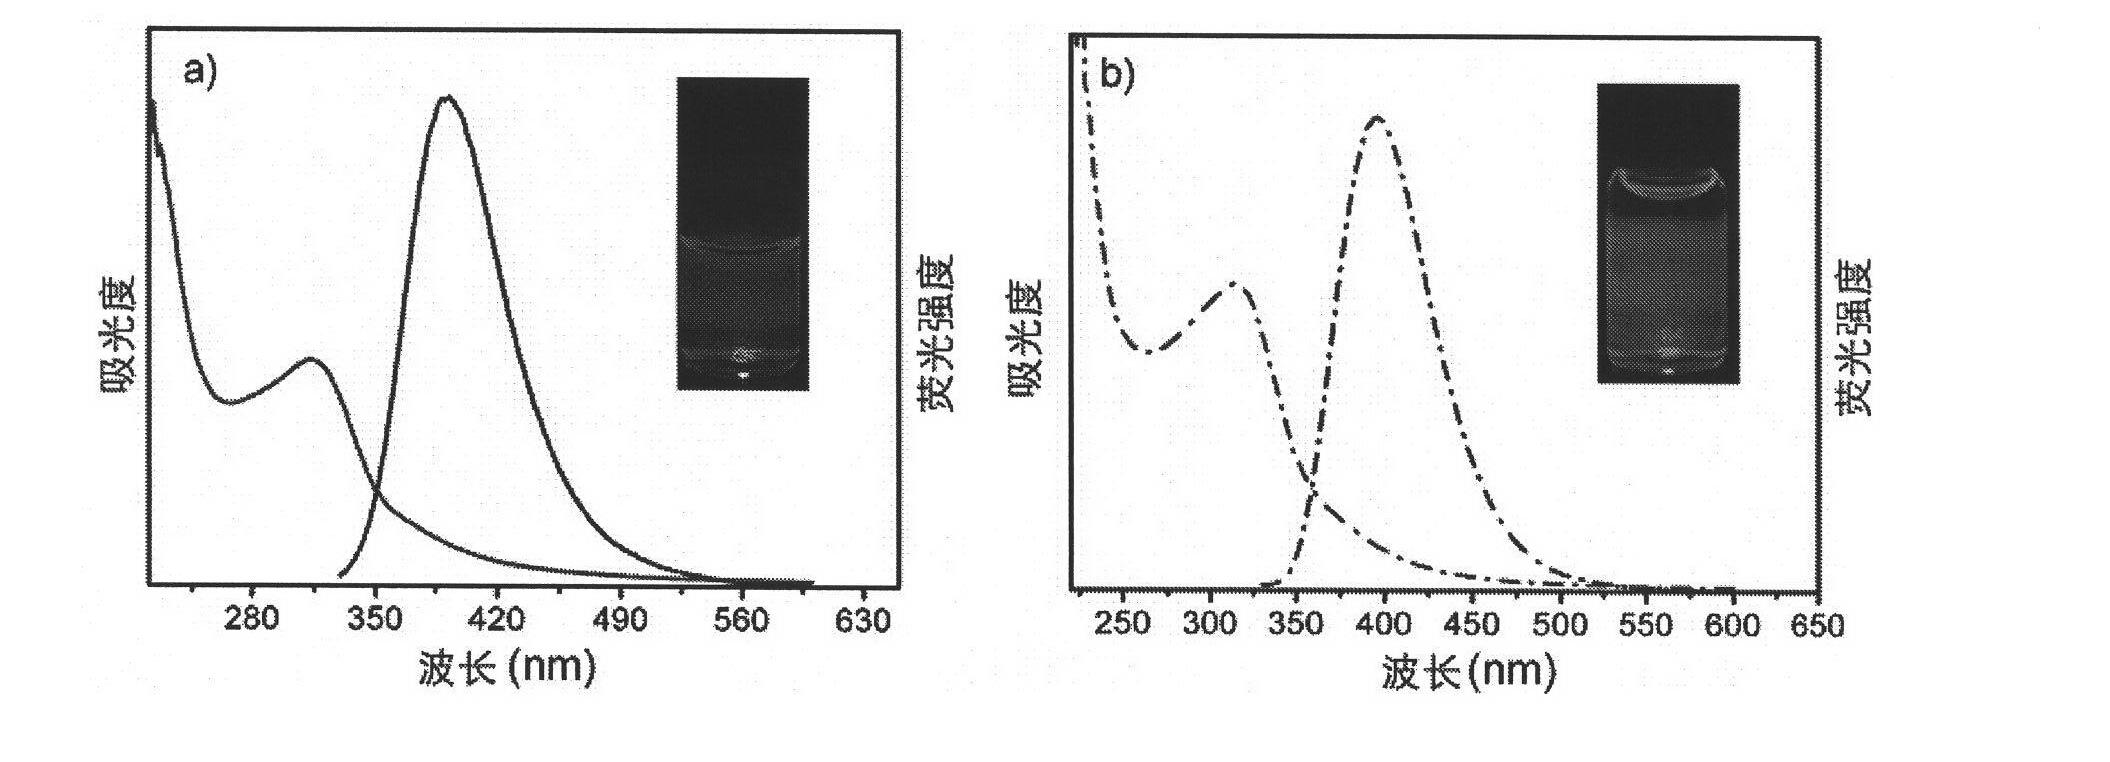 Pyrolytic synthesis method for water-soluble fluorescent carbon nano-particles